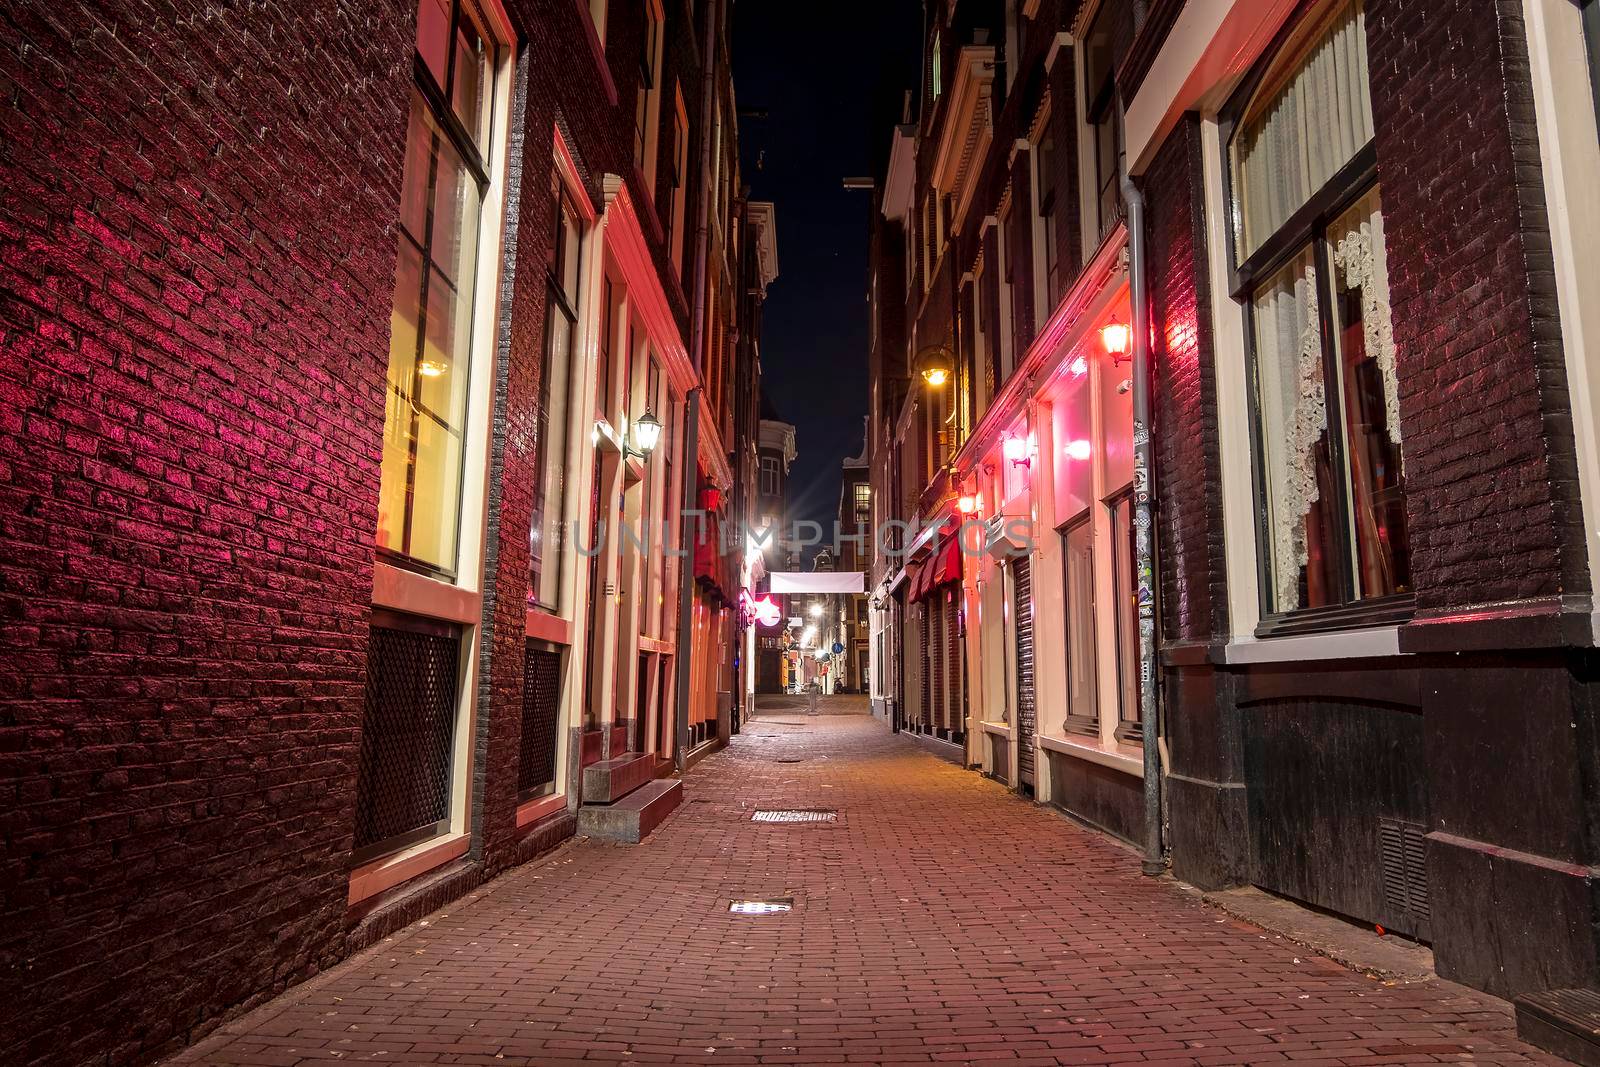 Red light district in Amsterdam the Netherlands by night by devy